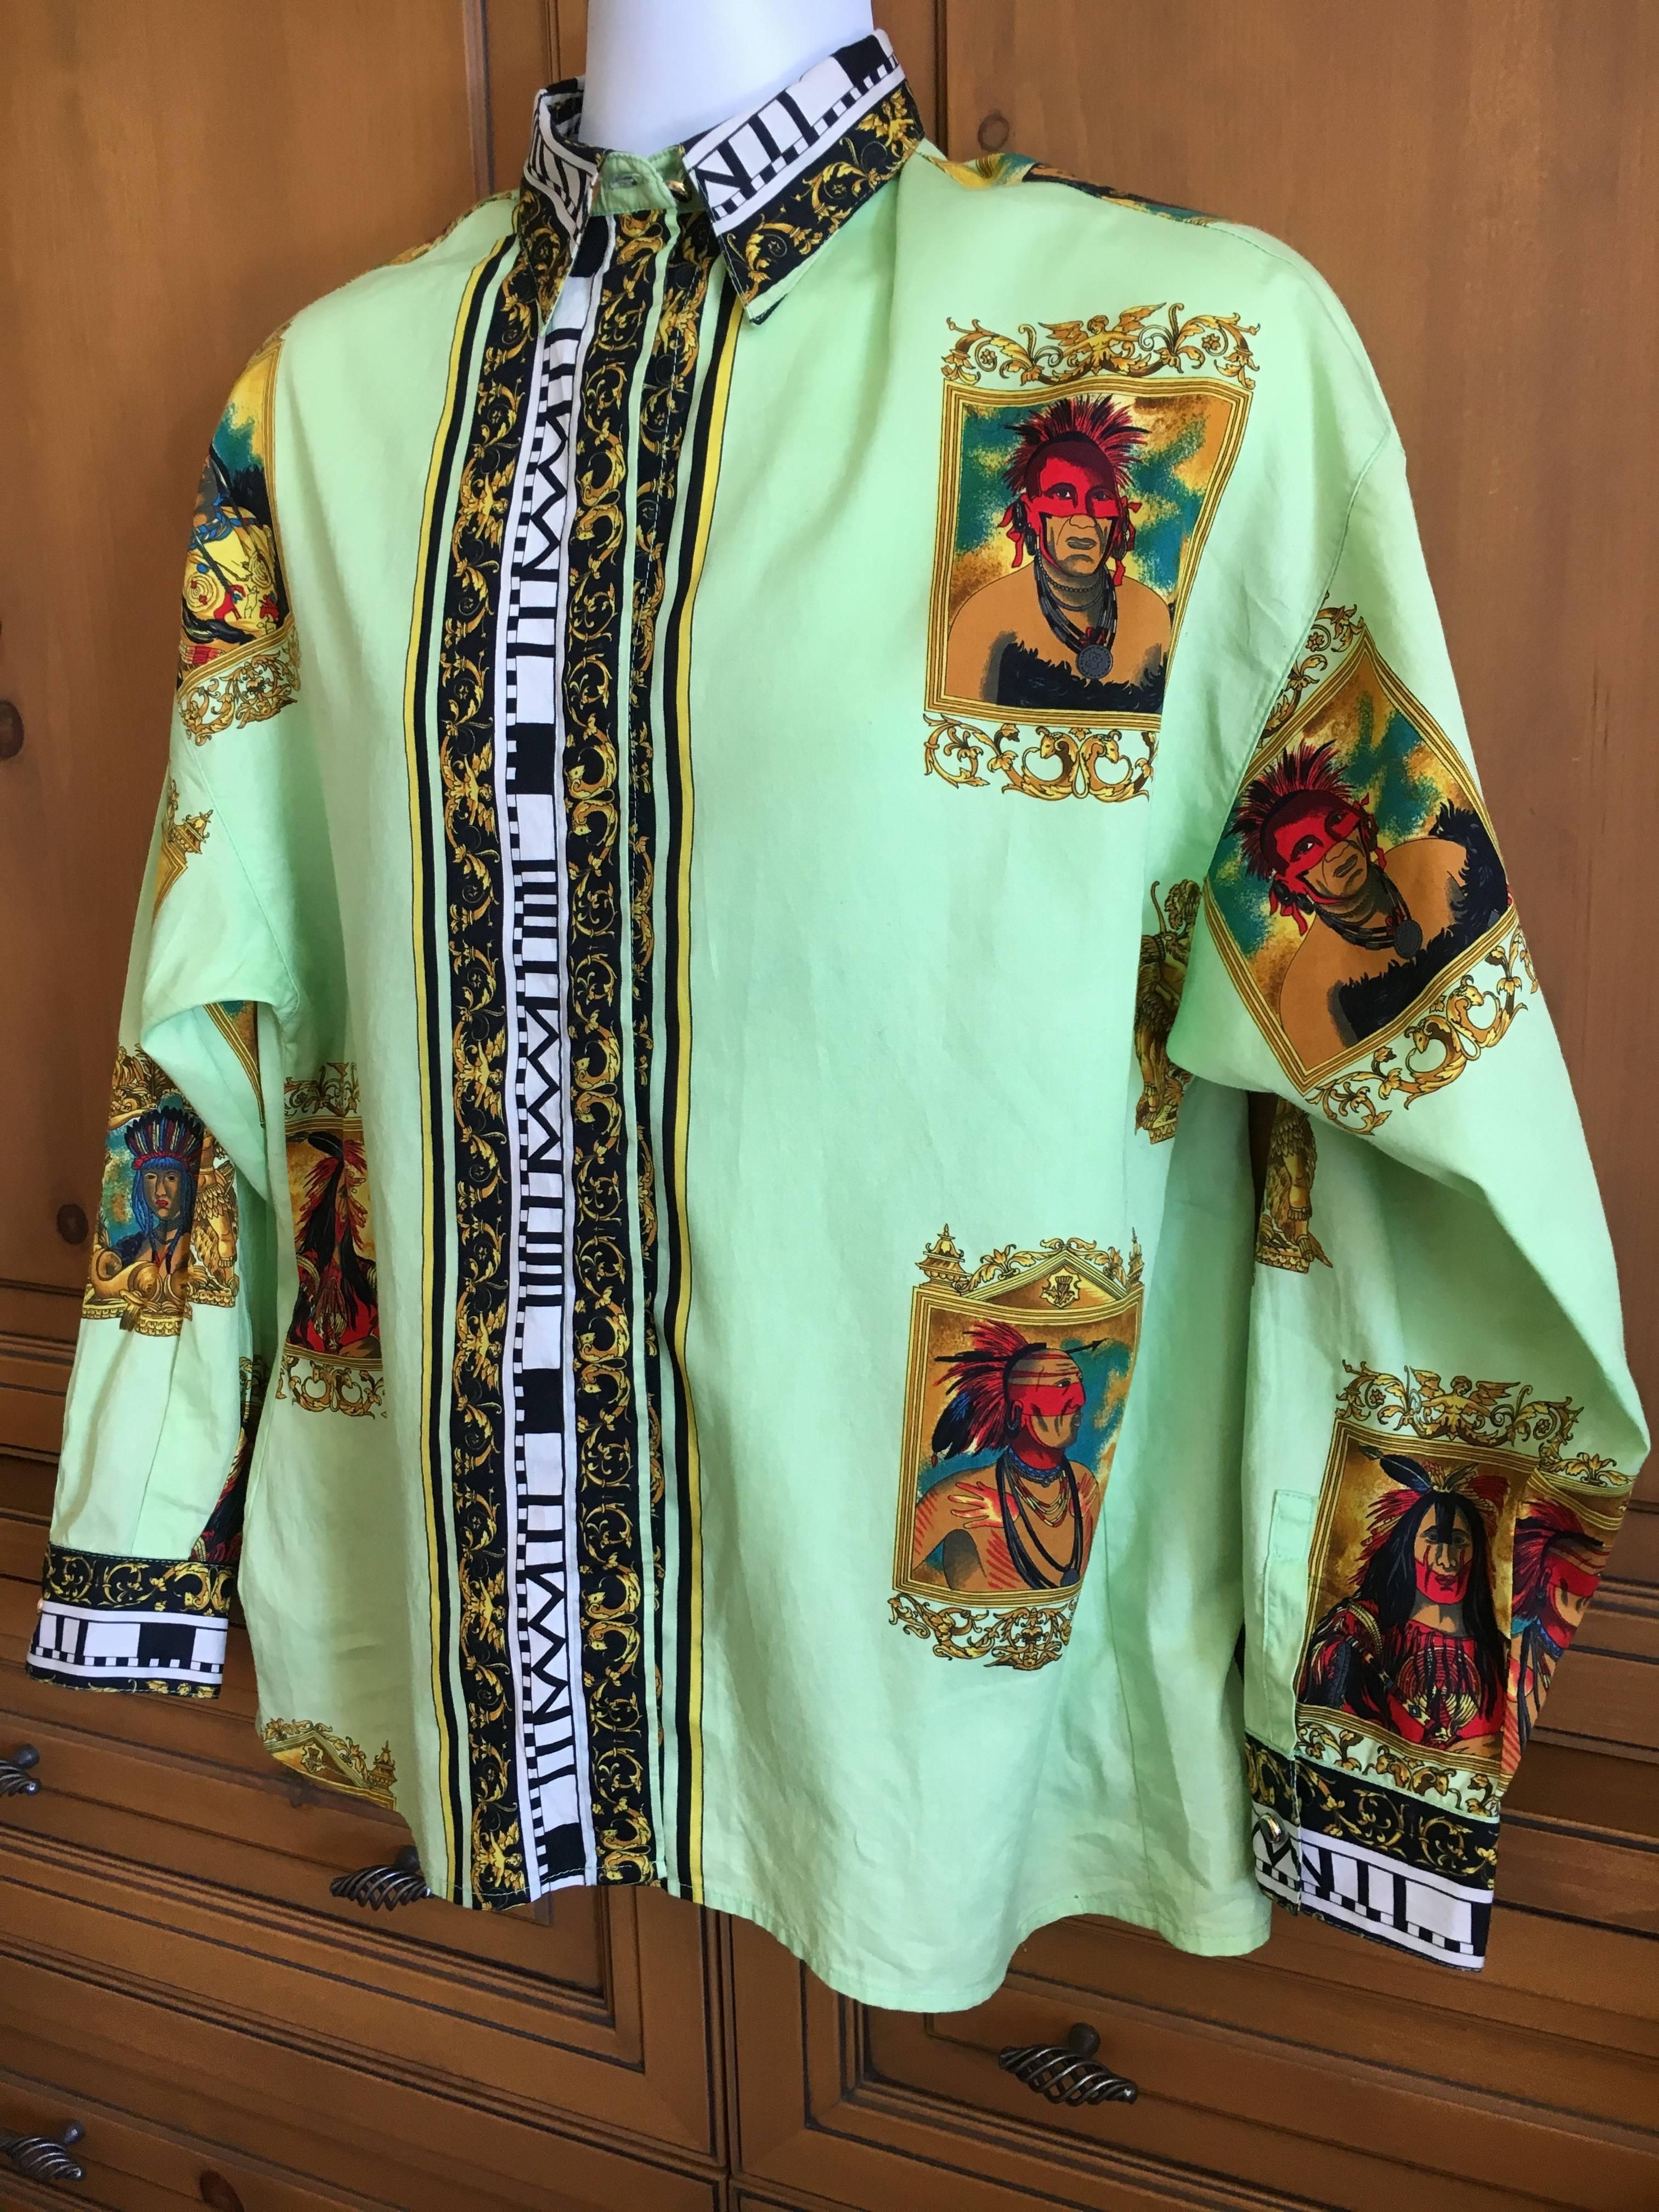 Versus Gianni Versace Rare1993 Cotton Indian Print Men's Large Shirt 

This is sublime, the rare avis for collectors. 

Marked size 46, I would say it's a large

 Appx Measurements ;

 Chest 44"

Waist 40" 

Length 28"

Across